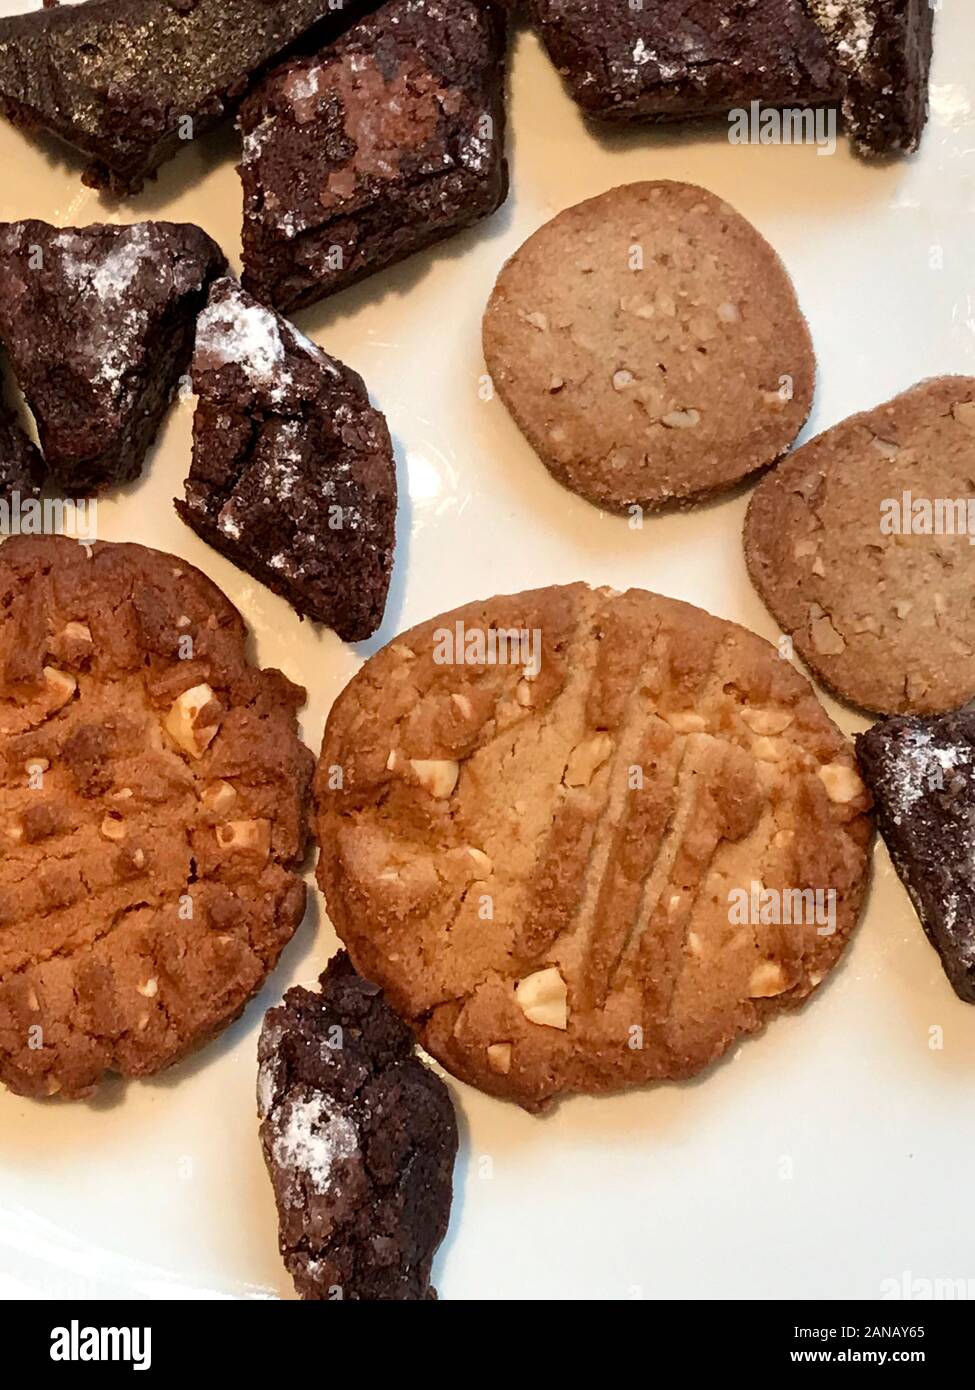 Variety of cookies on a plate. Stock Photo